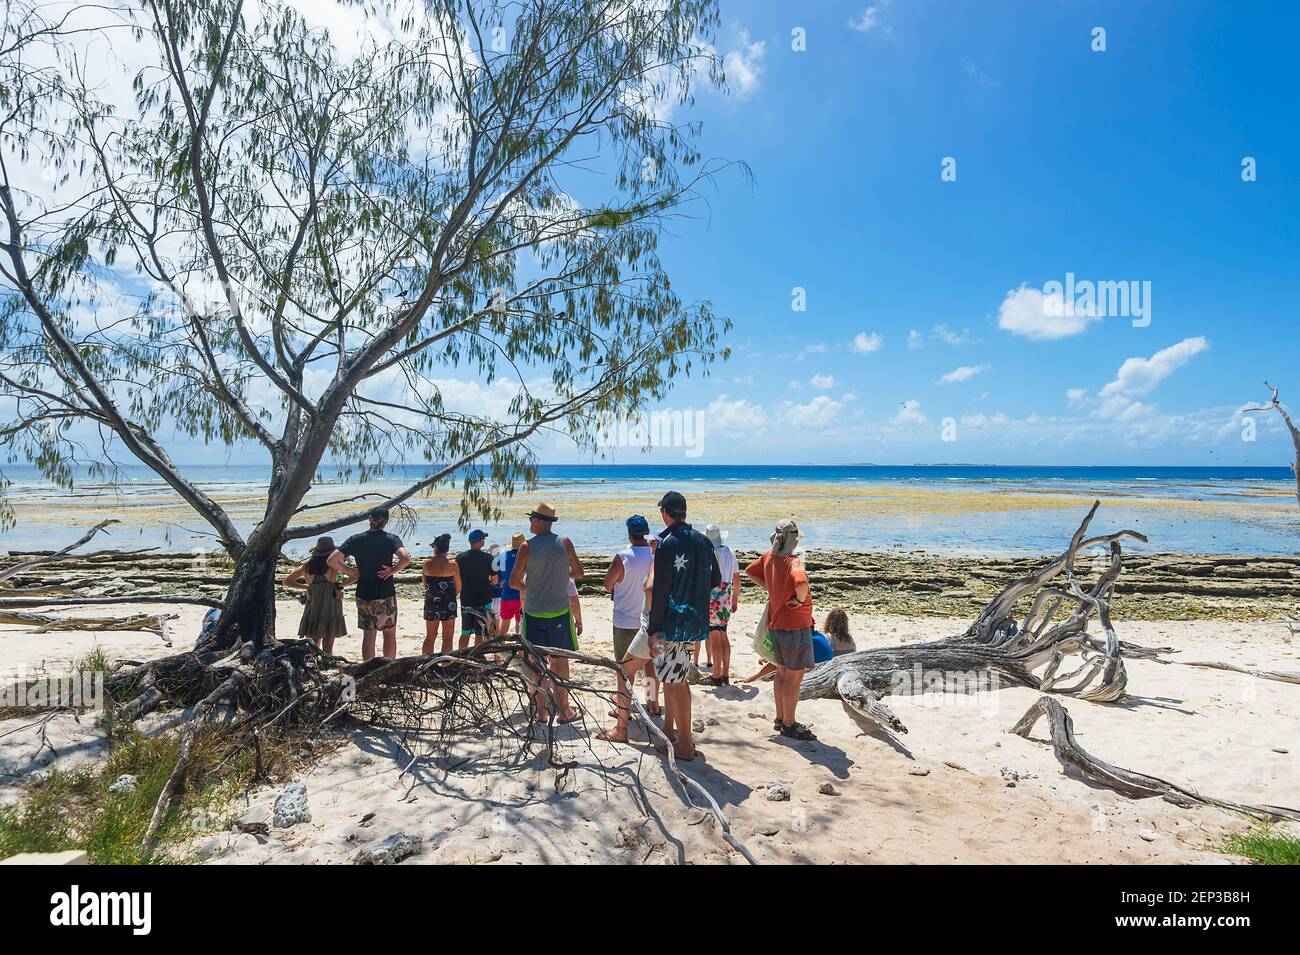 Tourists on a day trip to Lady Musgrave Island walking on the beach, Southern Great Barrier Reef, Queensland, QLD, Australia Stock Photo